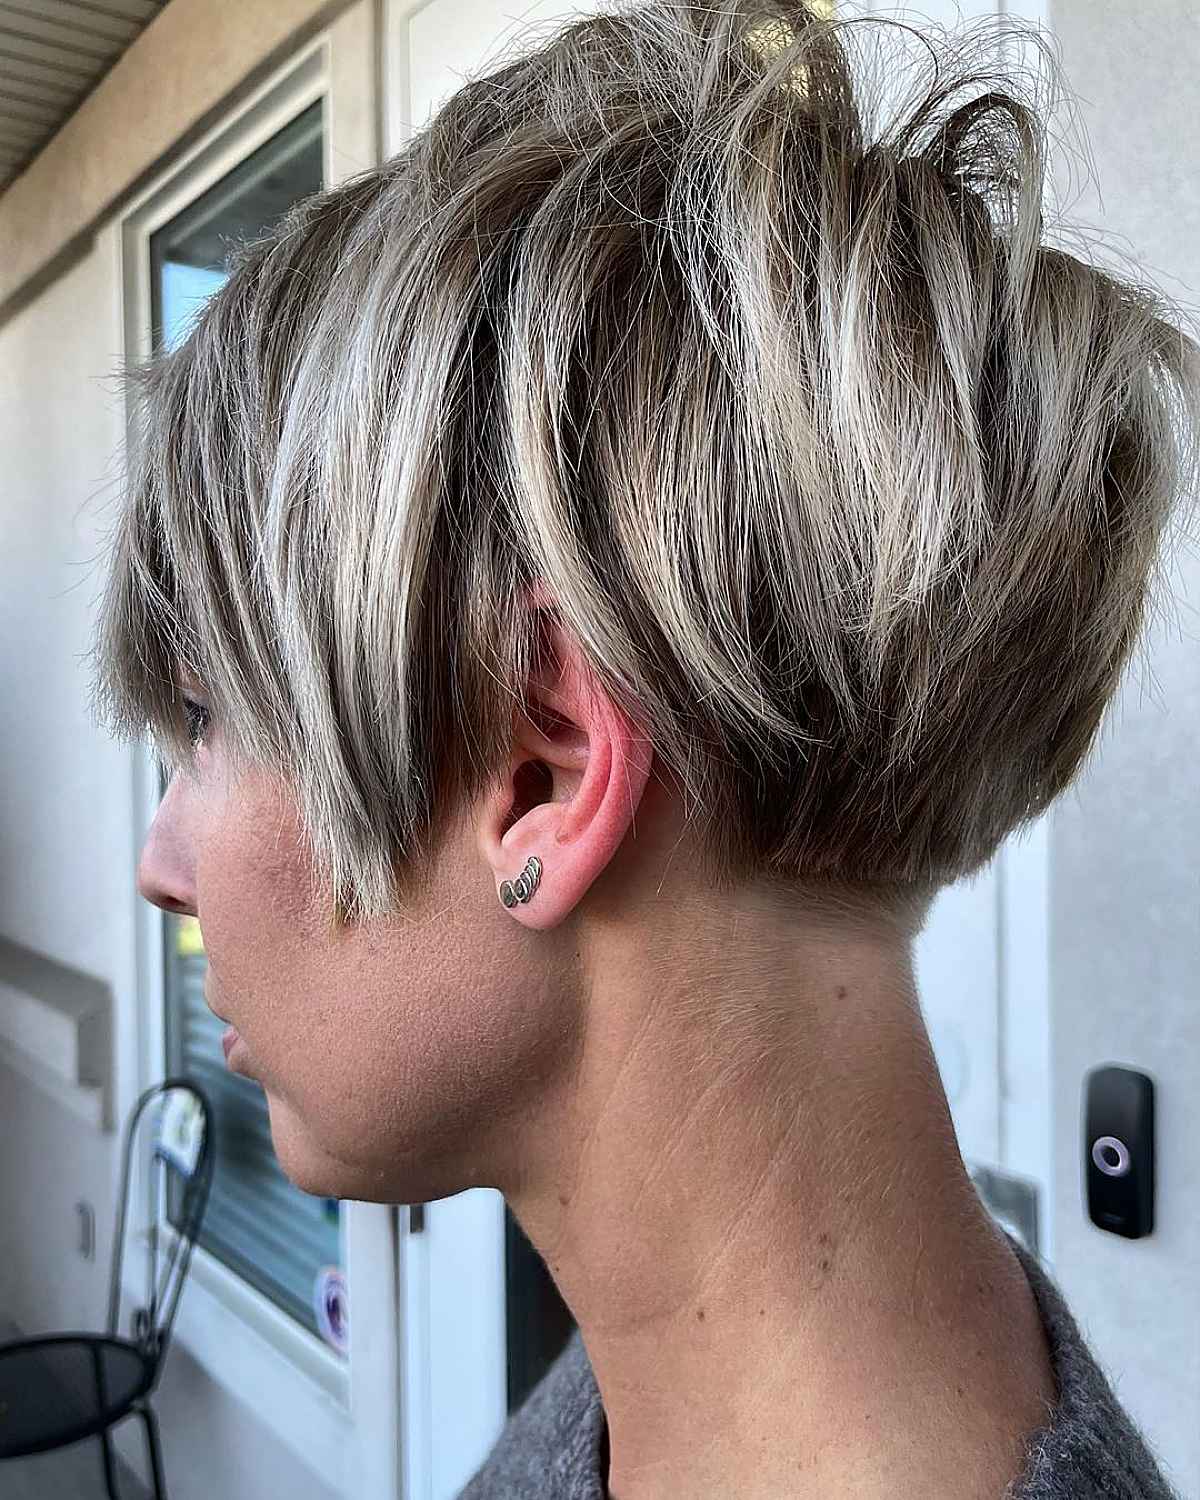 18 Short, Stacked Pixie Bob Haircuts for a Cute and Sassy Look